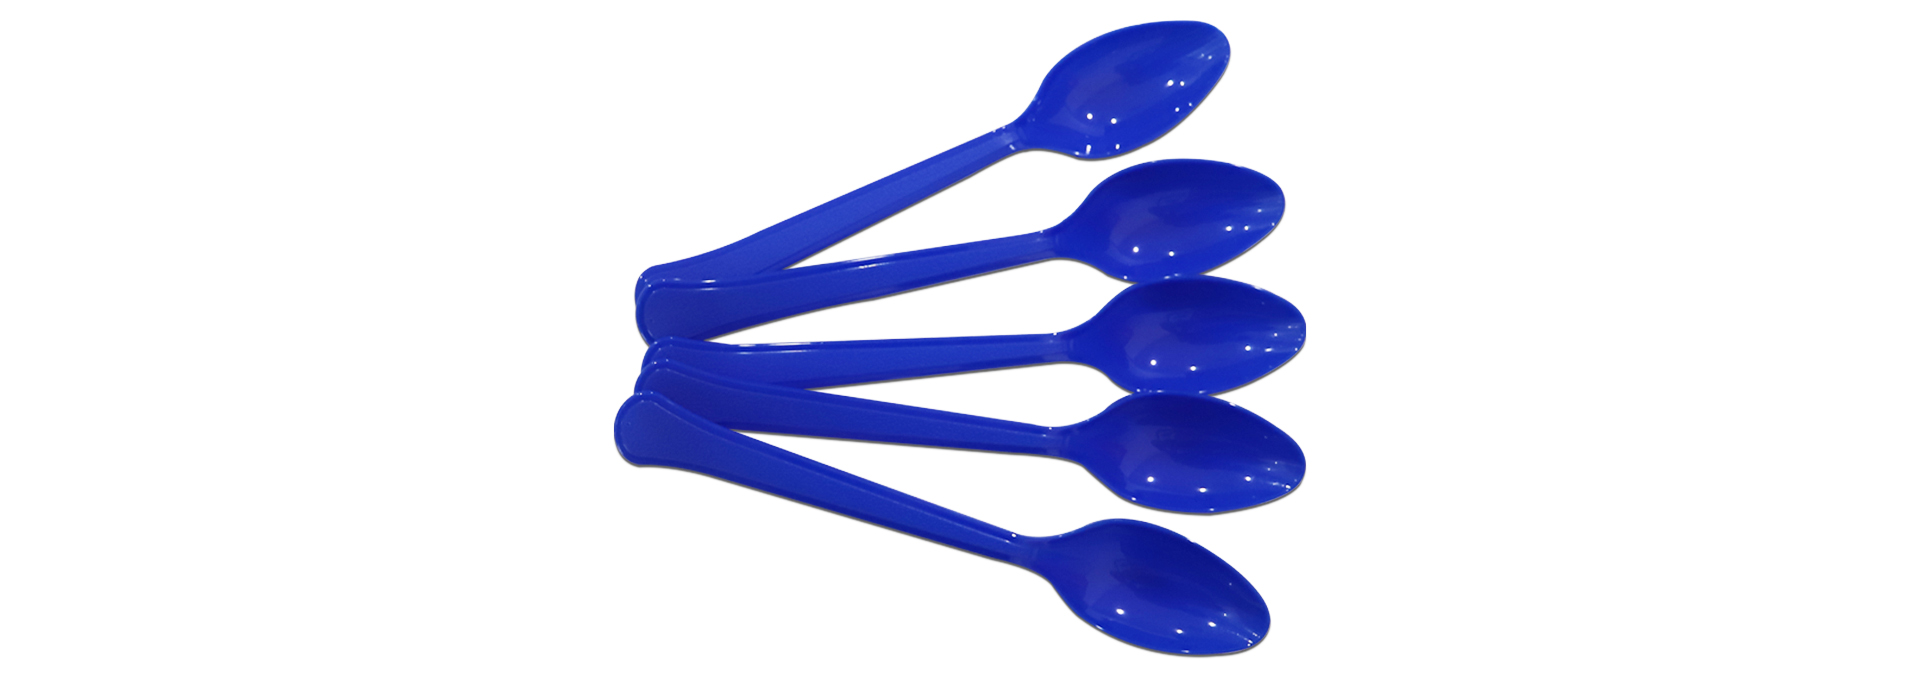 spoon-H